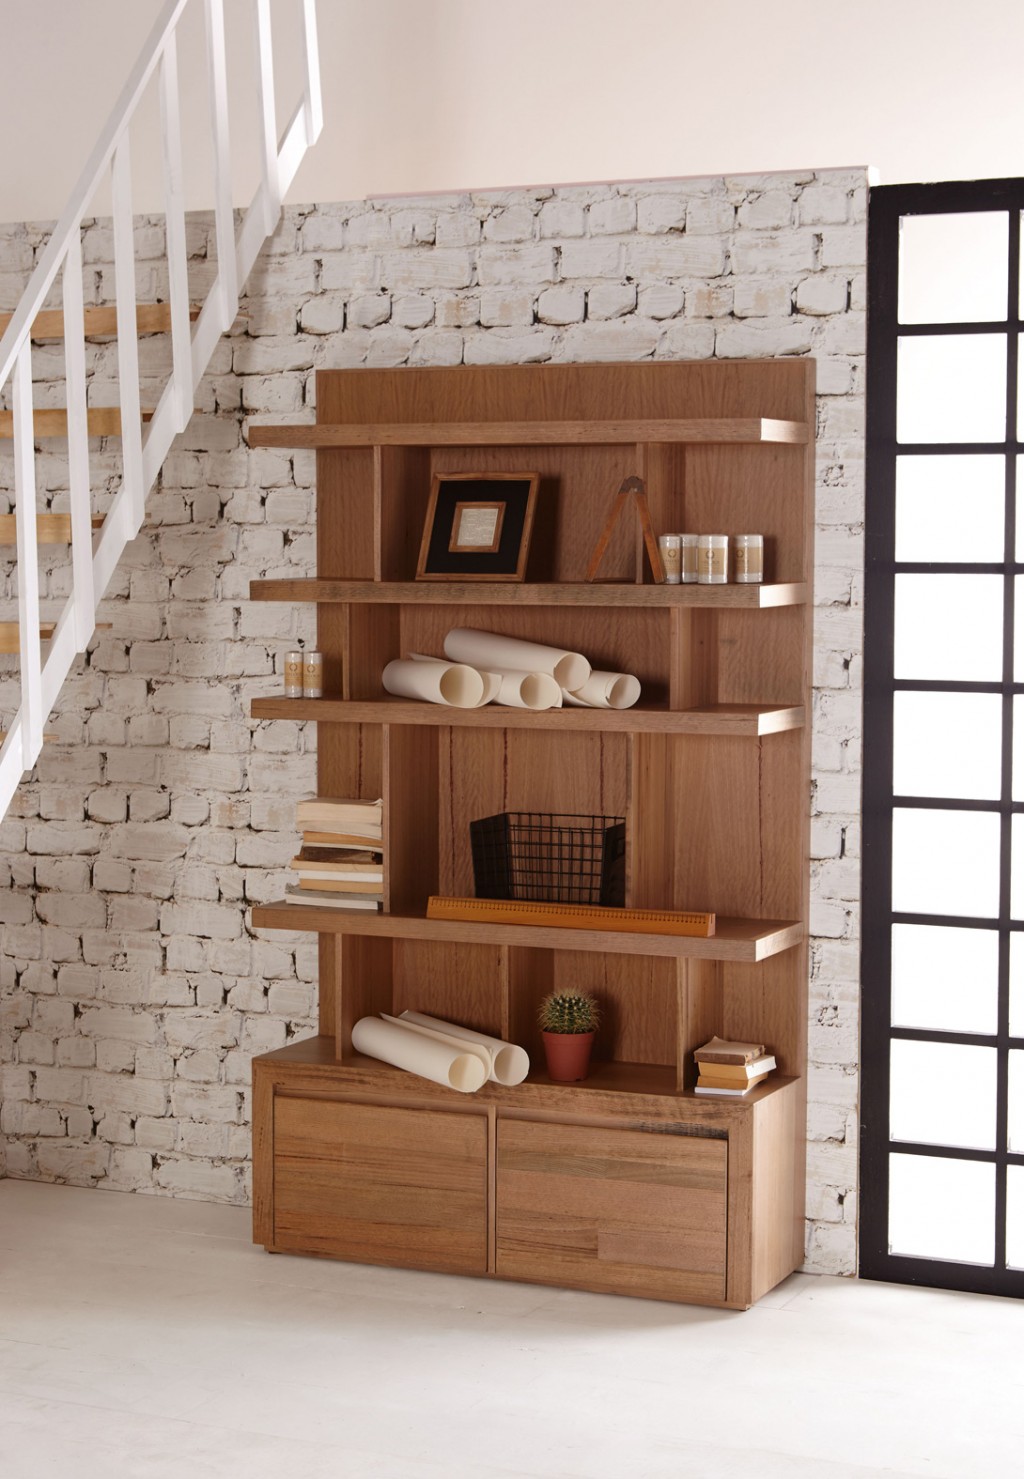 7 Storage Options That Will Make You Want To Get Your Home Office ...